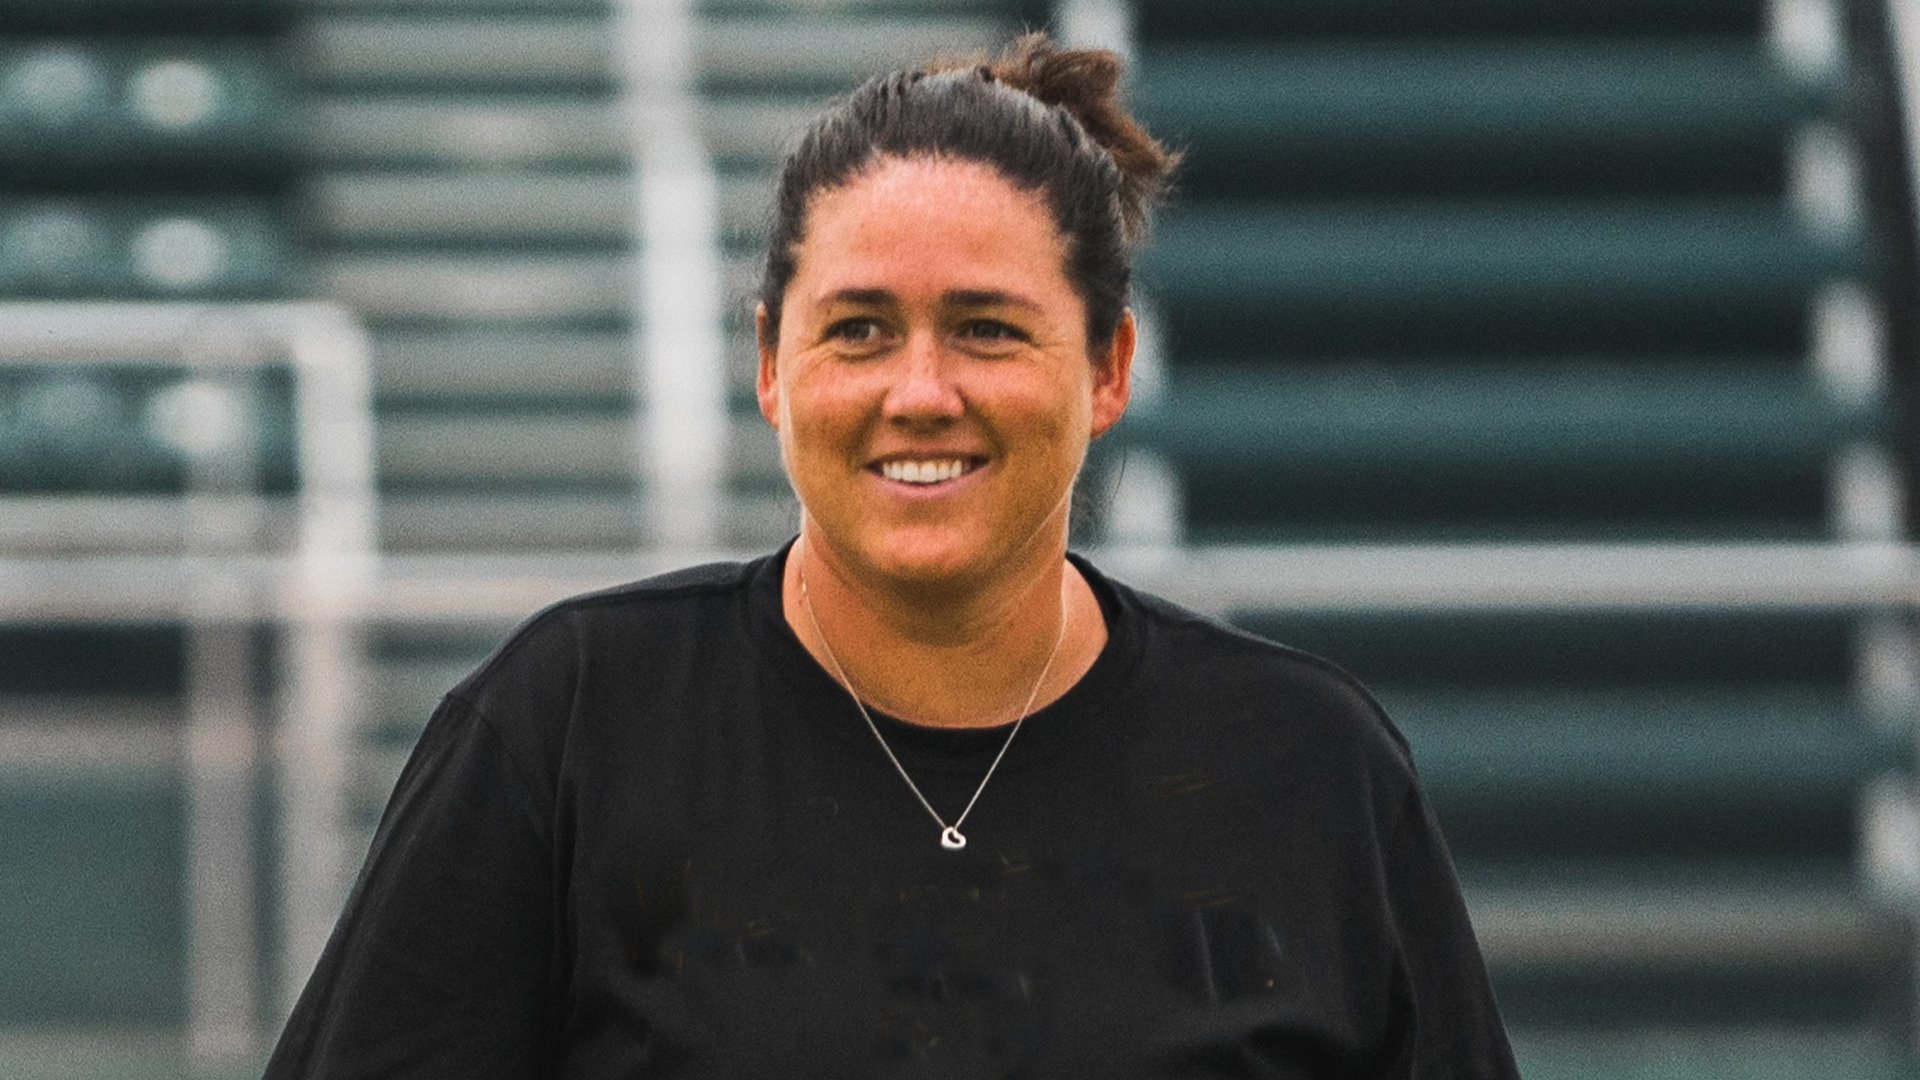 Keelan Joins Miami Soccer as Assistant Coach